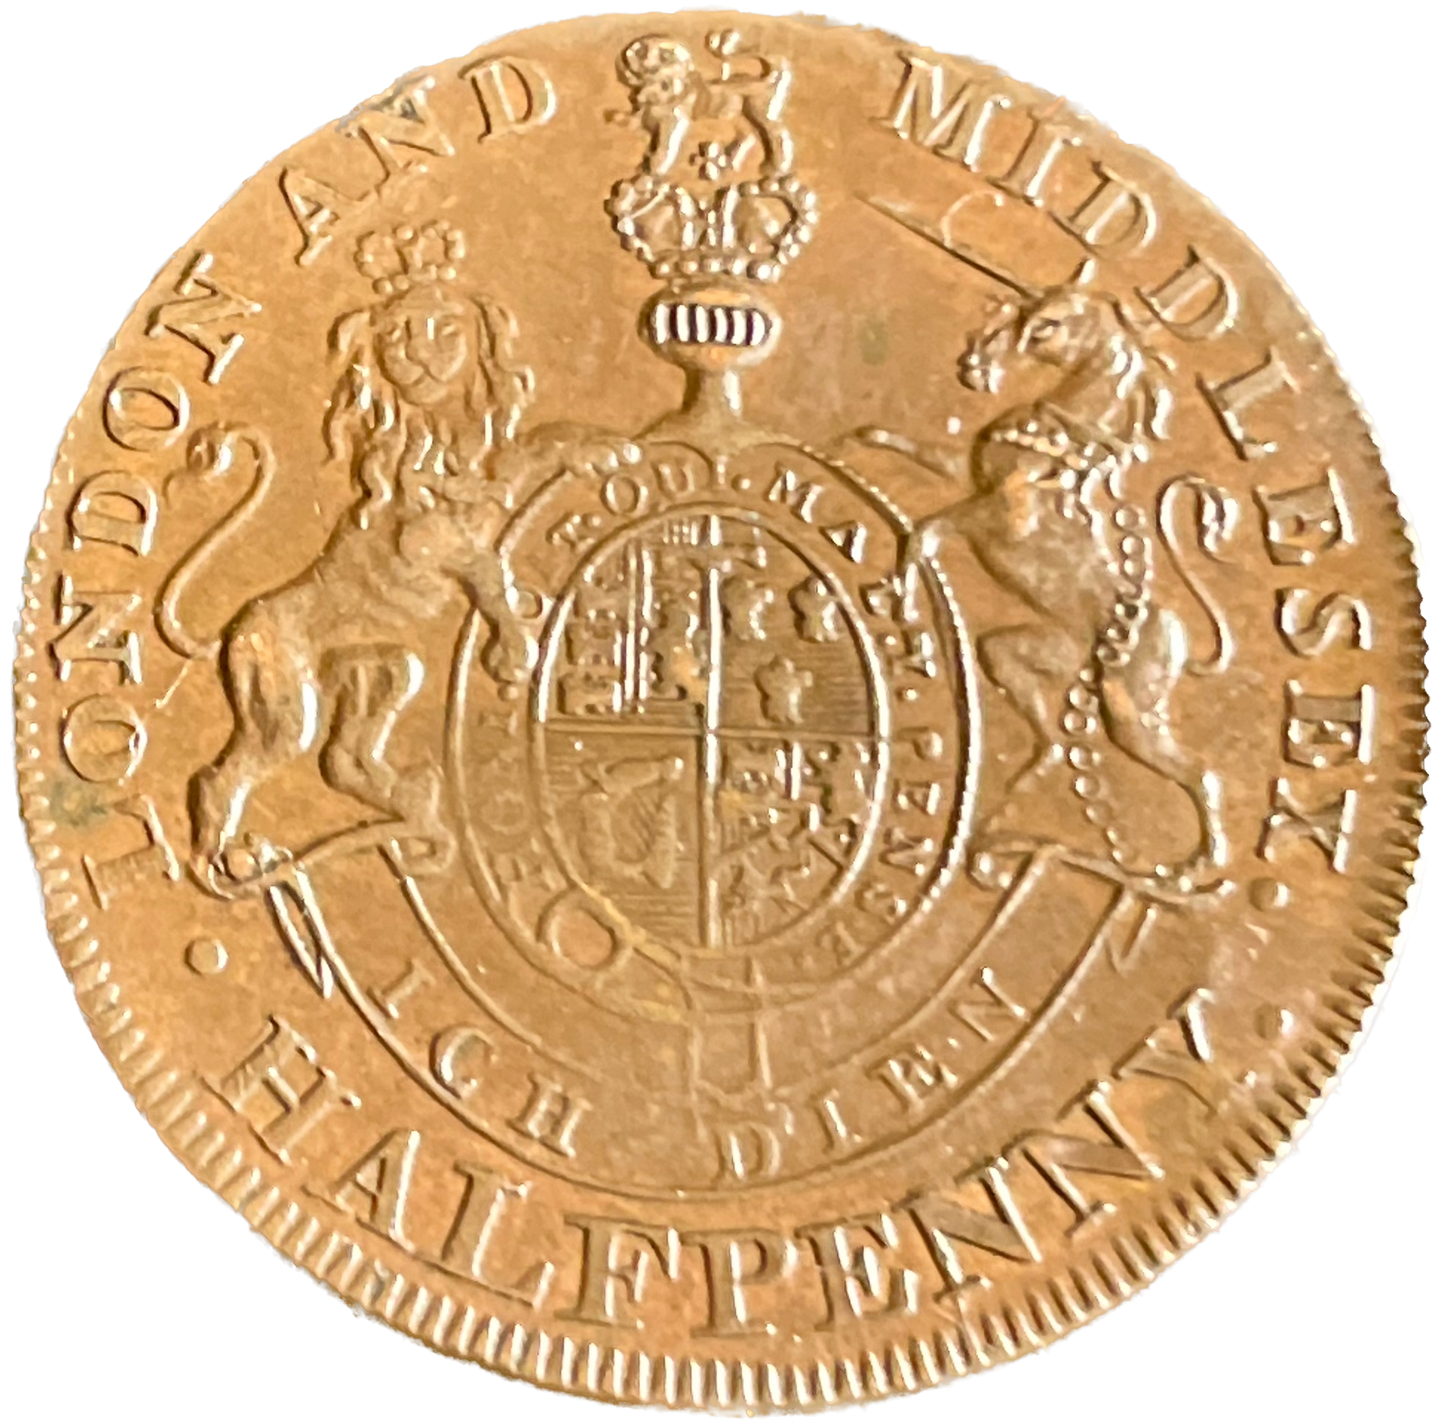 Middlesex D&H 954 National Series Conder Halfpenny